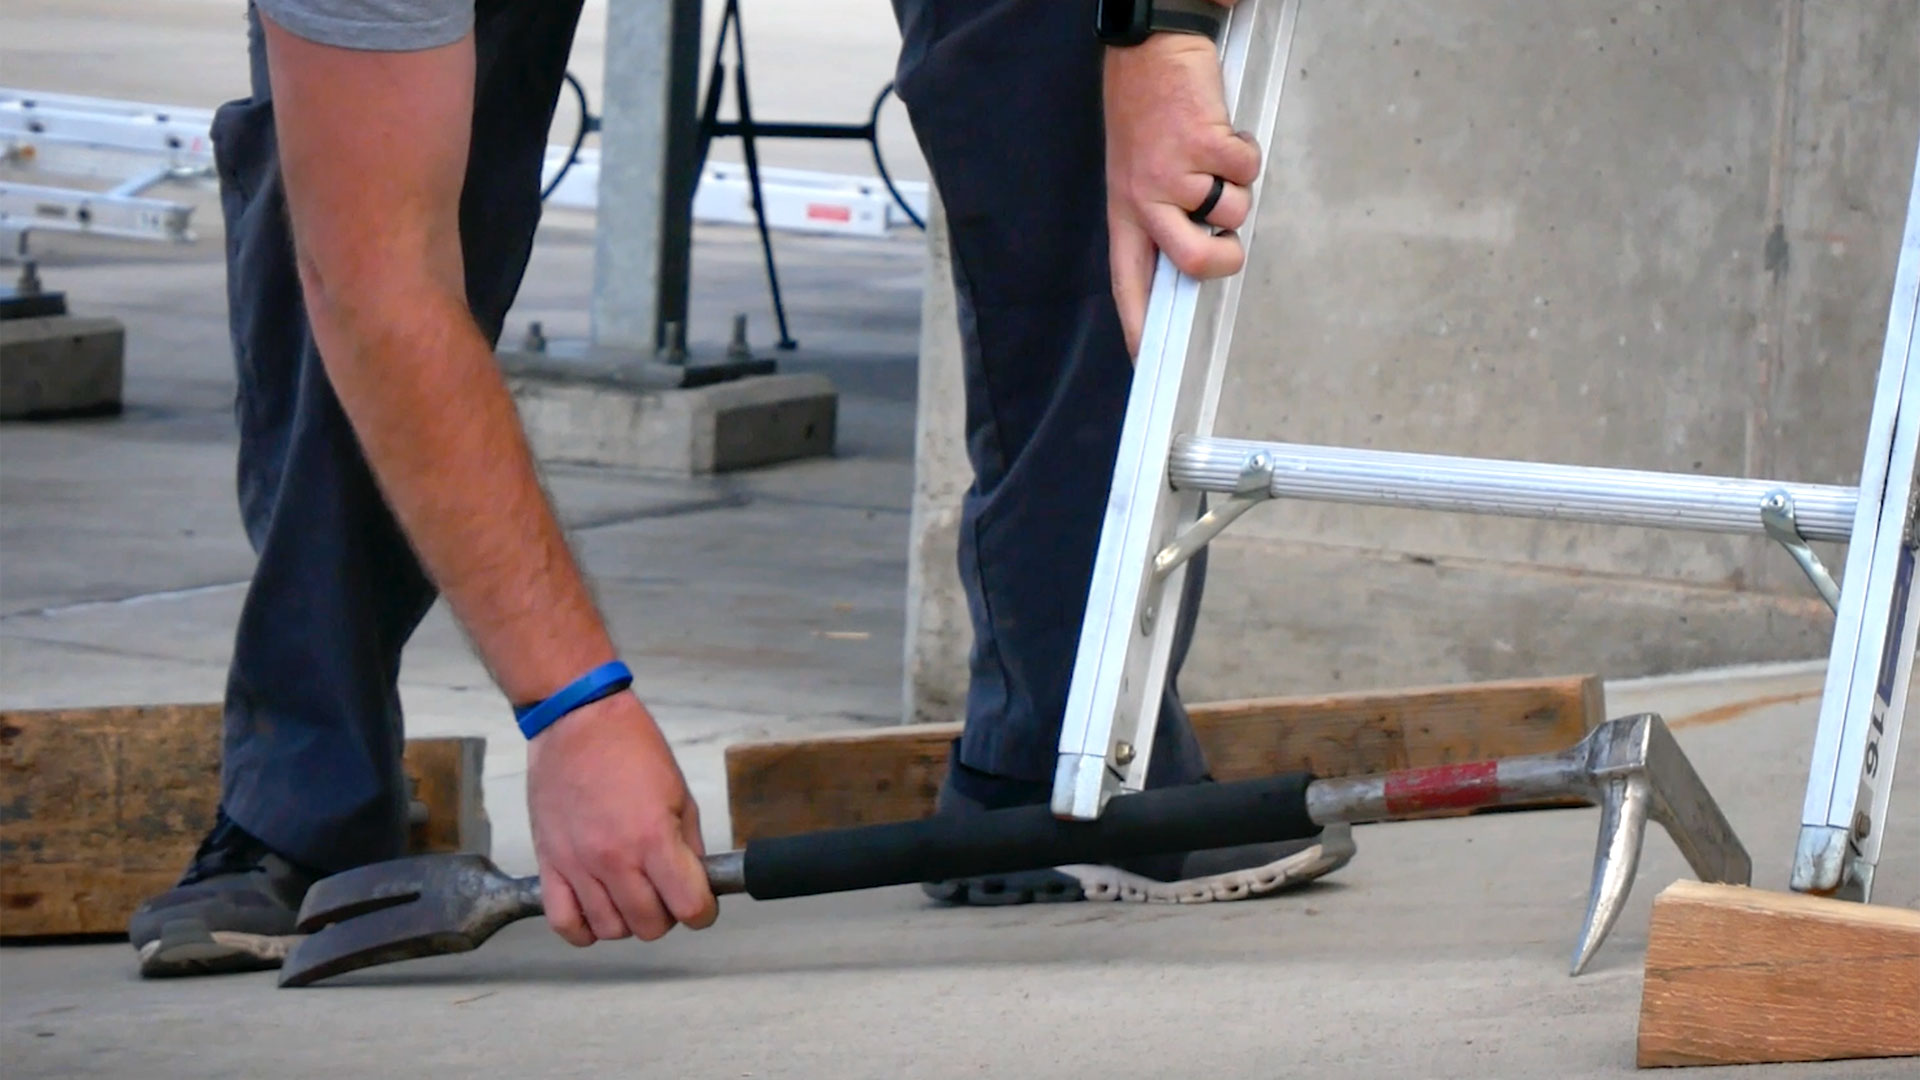 Featured image for “Stabilizing Uneven Ground Ladders”